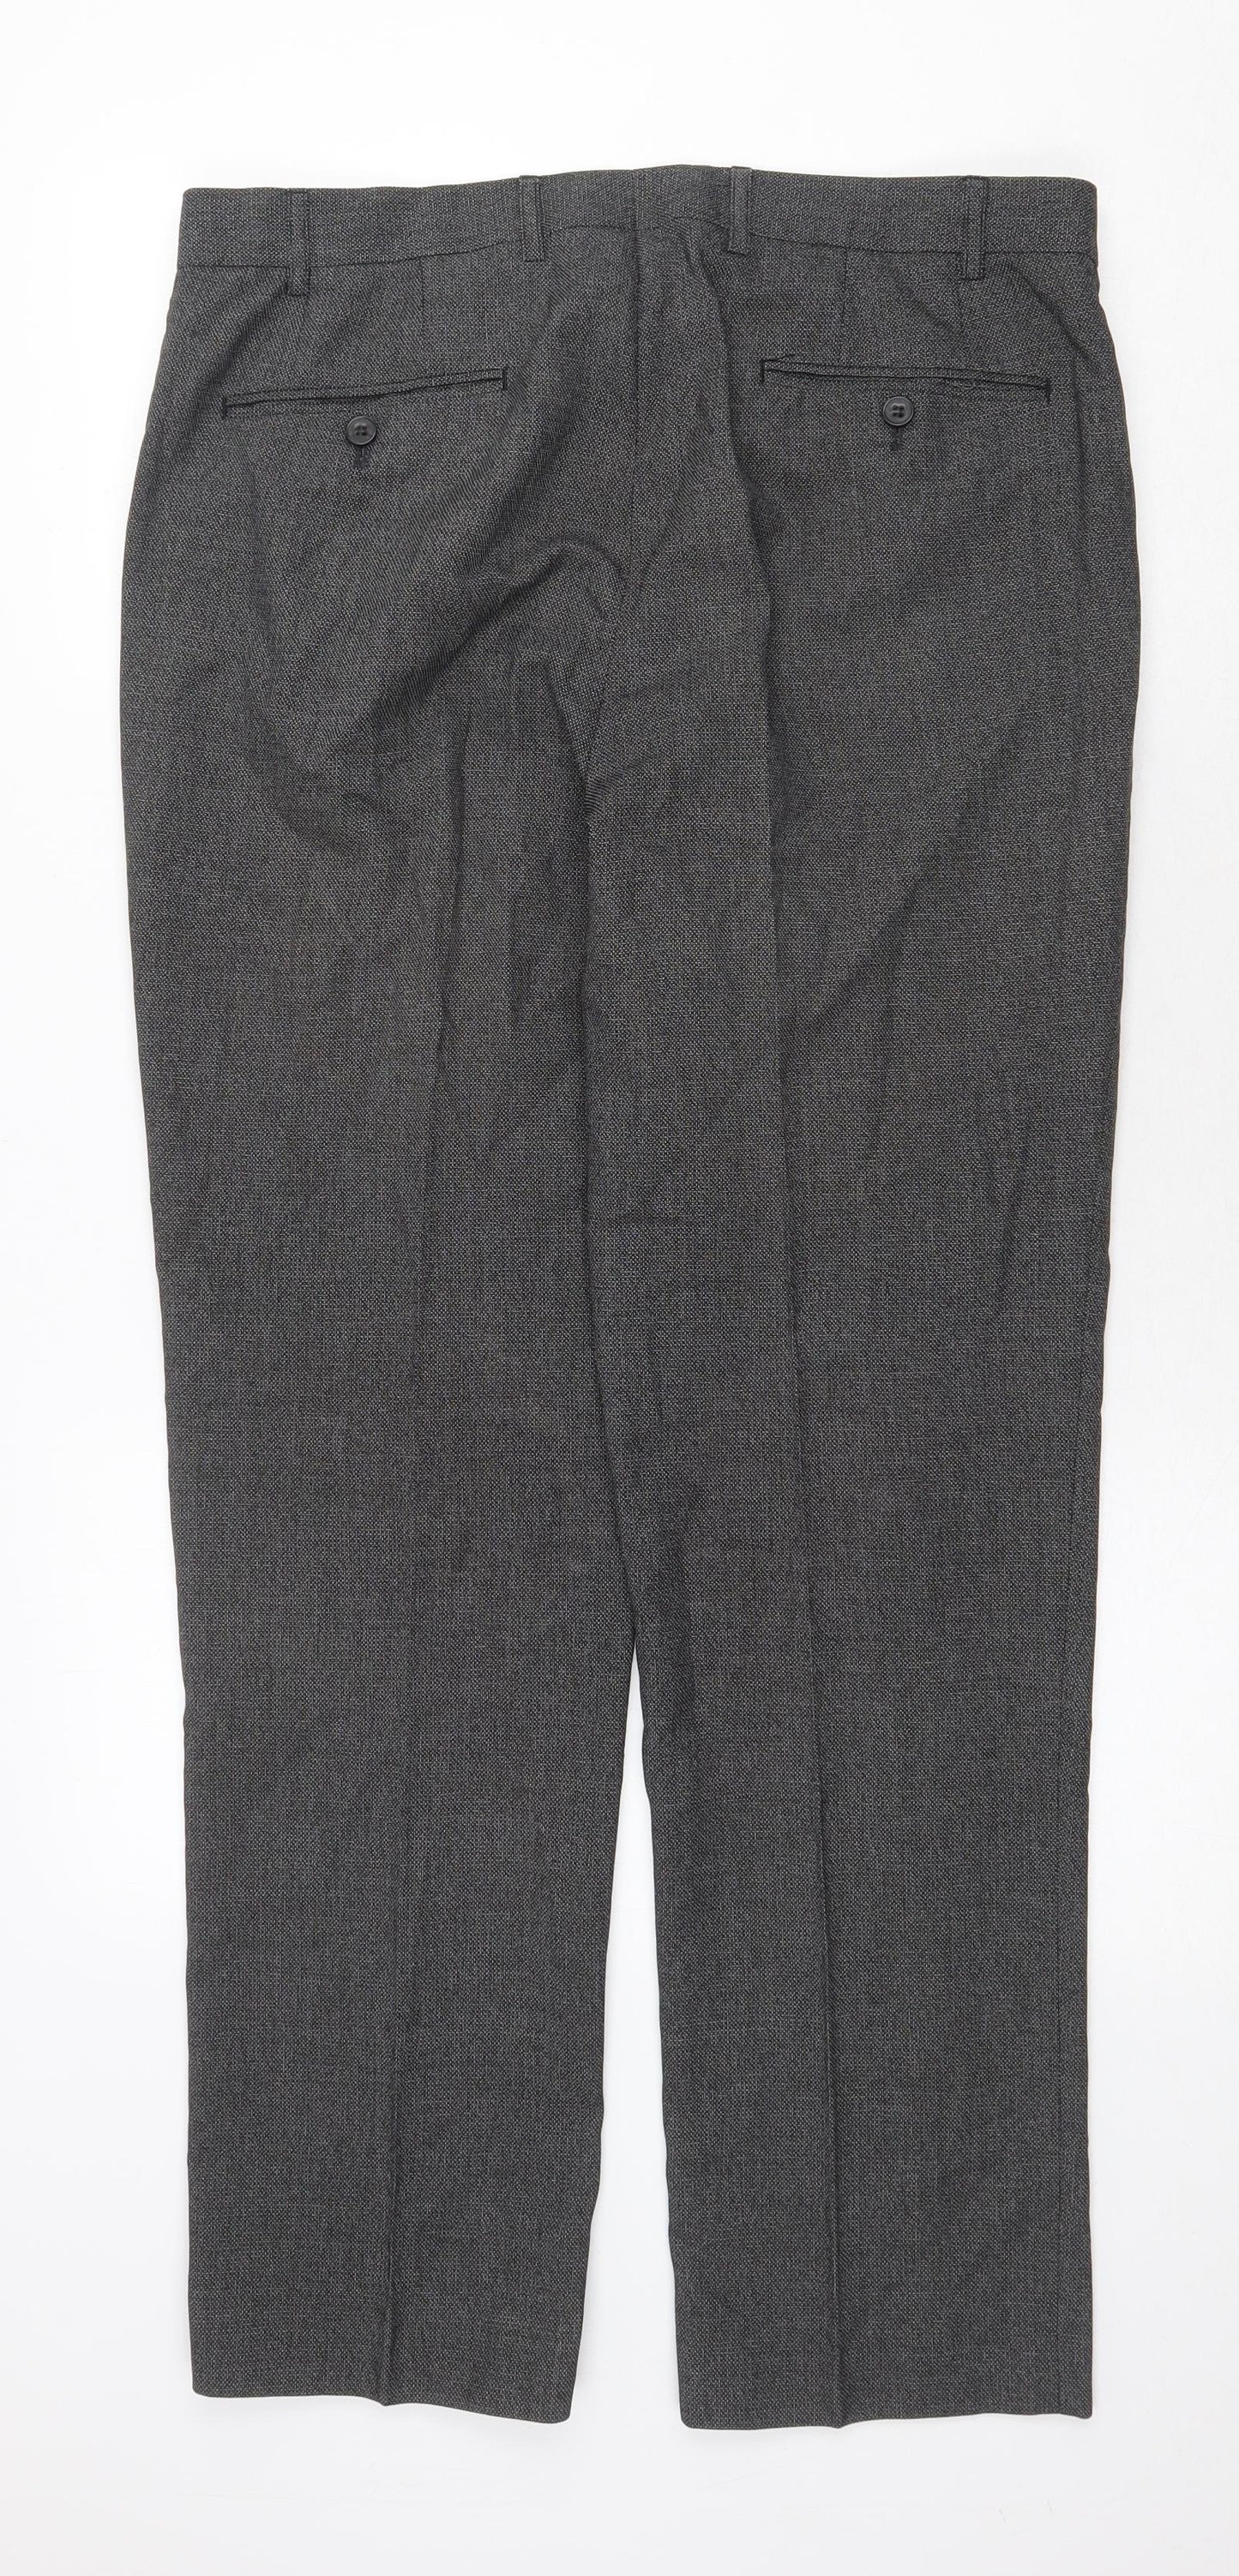 Skopes Mens Grey Polyester Dress Pants Trousers Size 34 in Regular Zip